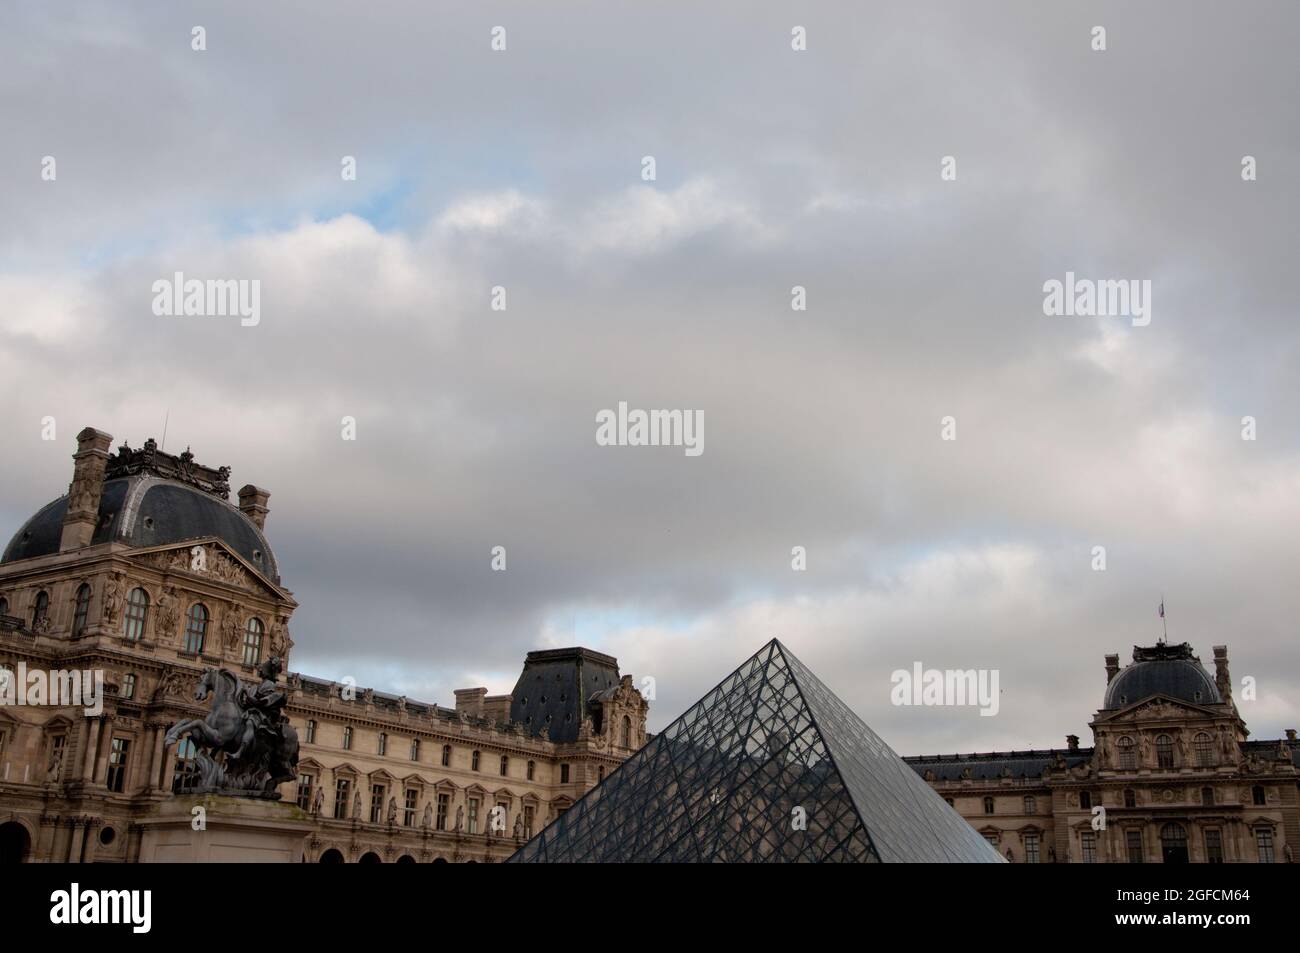 Page 2 - Pyramide De High Resolution Stock Photography and Images - Alamy